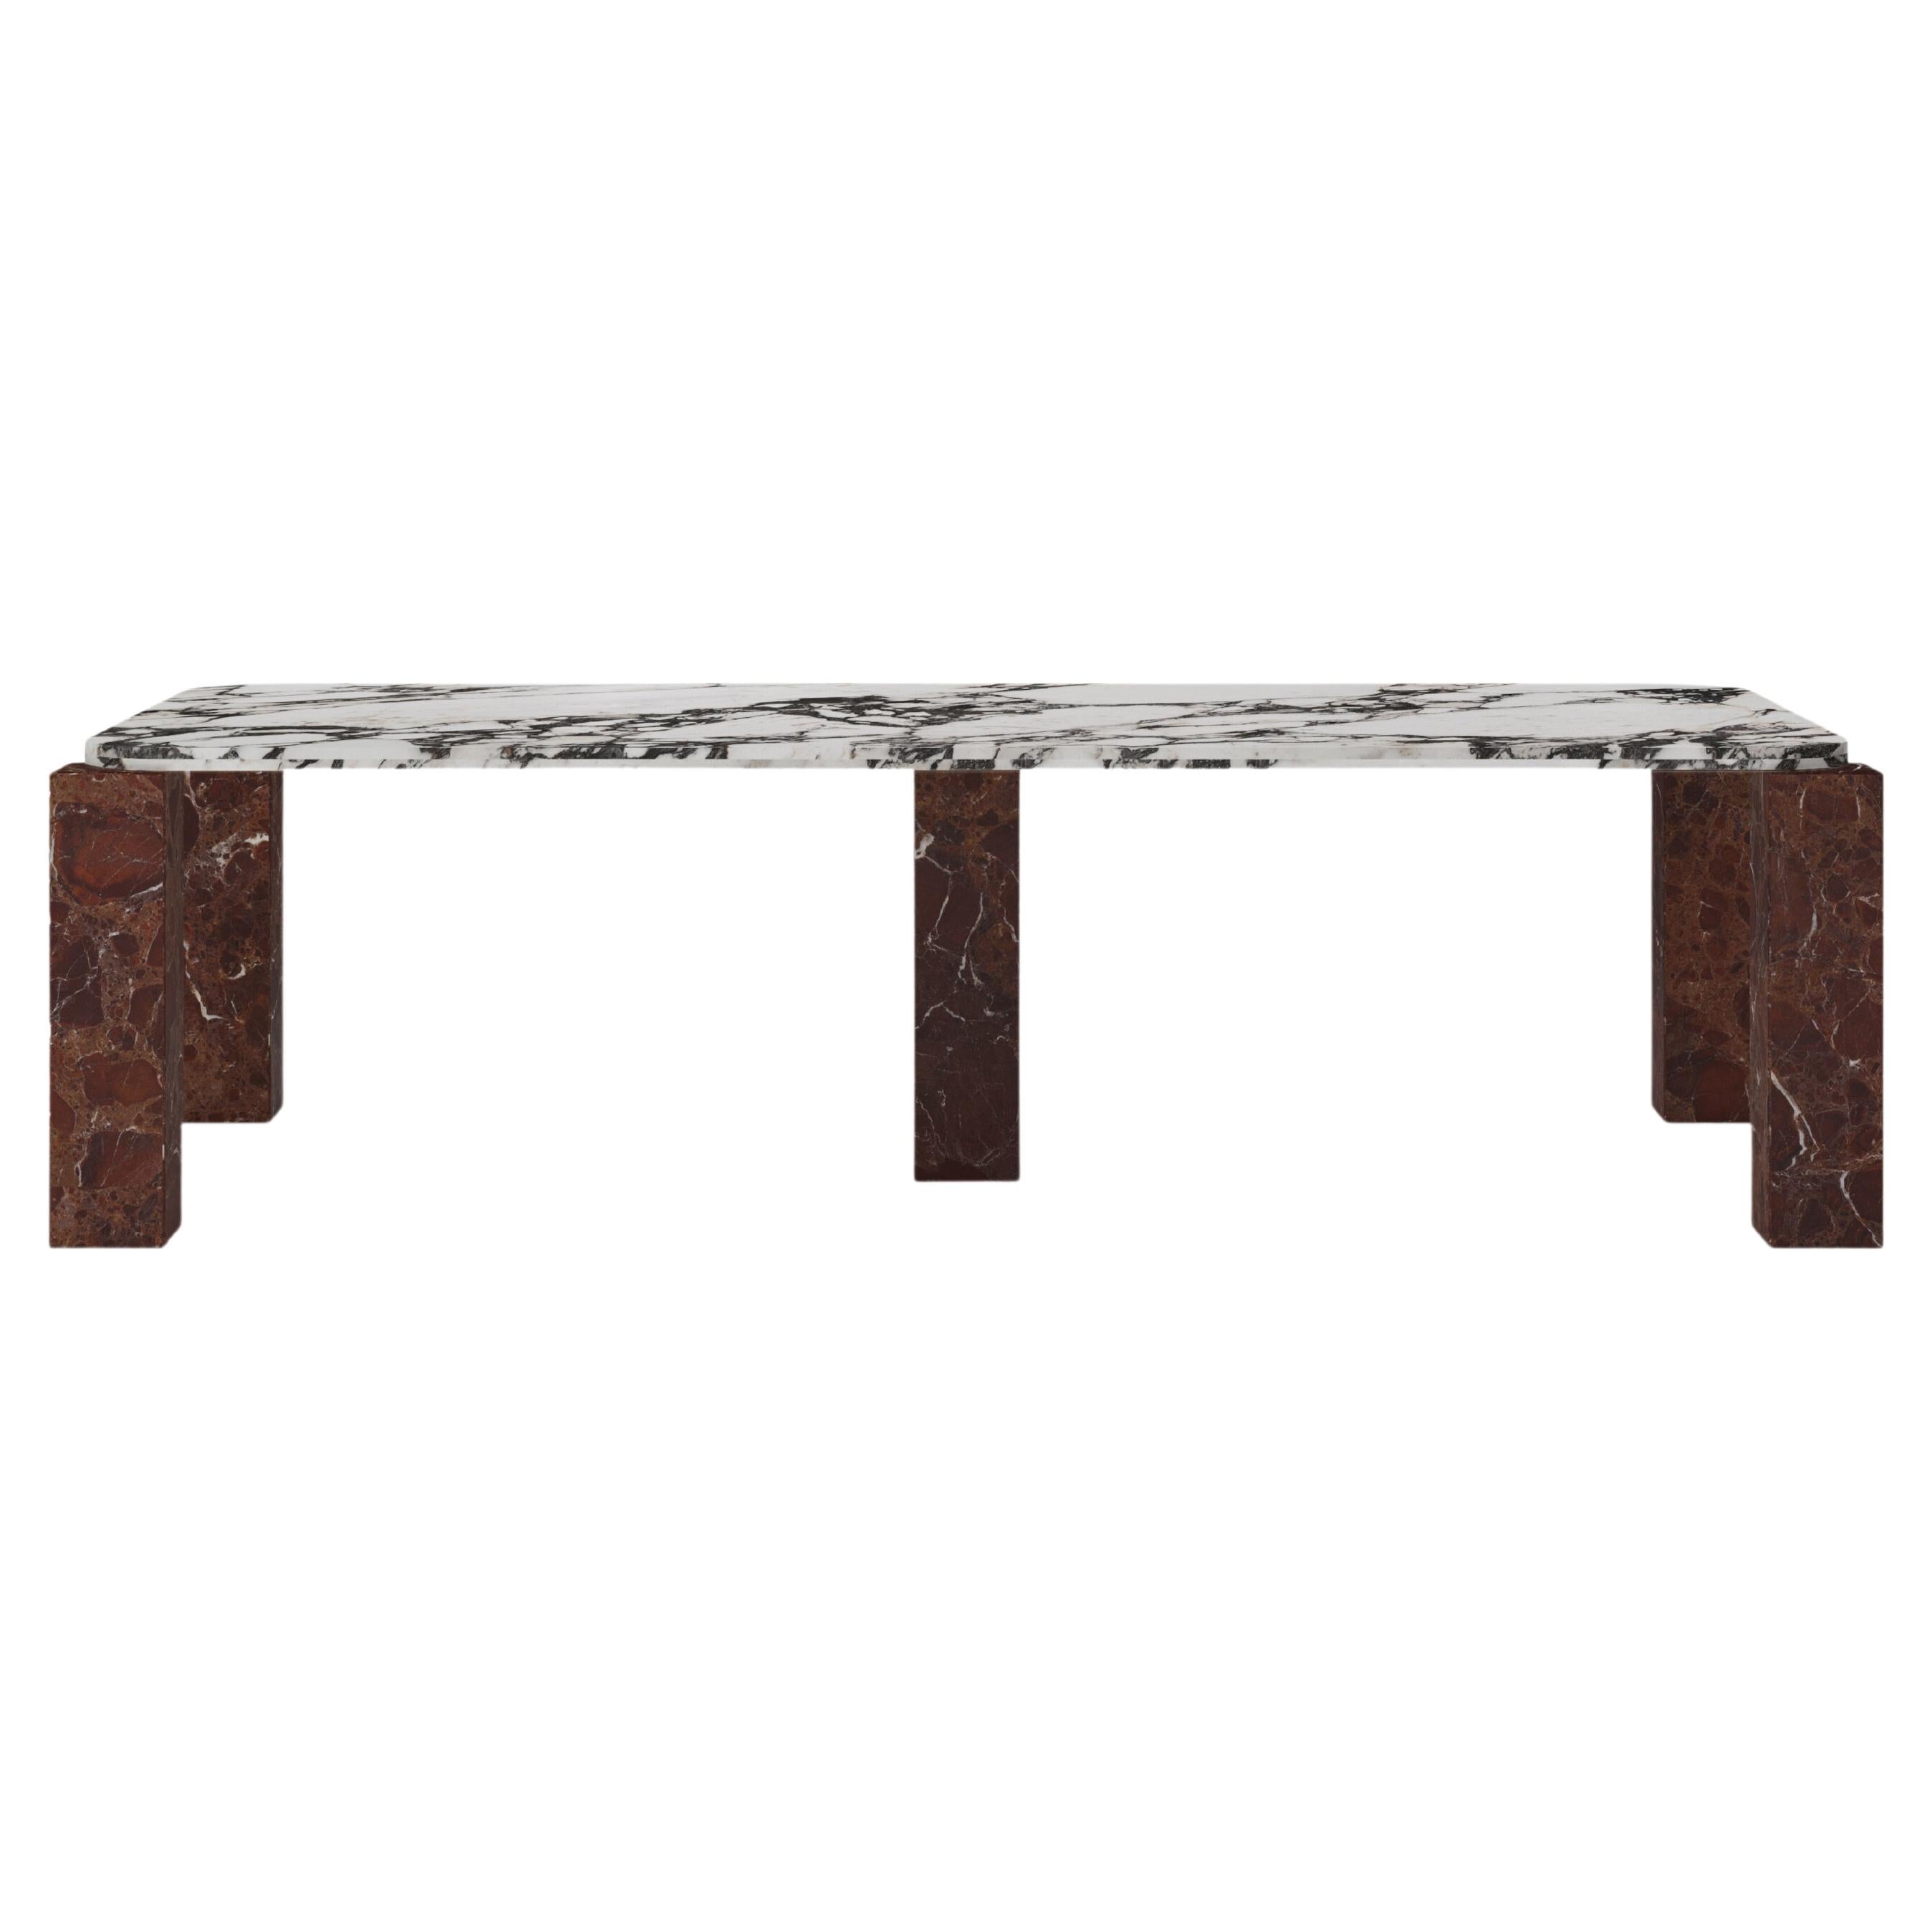 FORM(LA) Cubo Rectangle Dining Table 110”L x 50”W x 30”H Viola & Rosso Marble